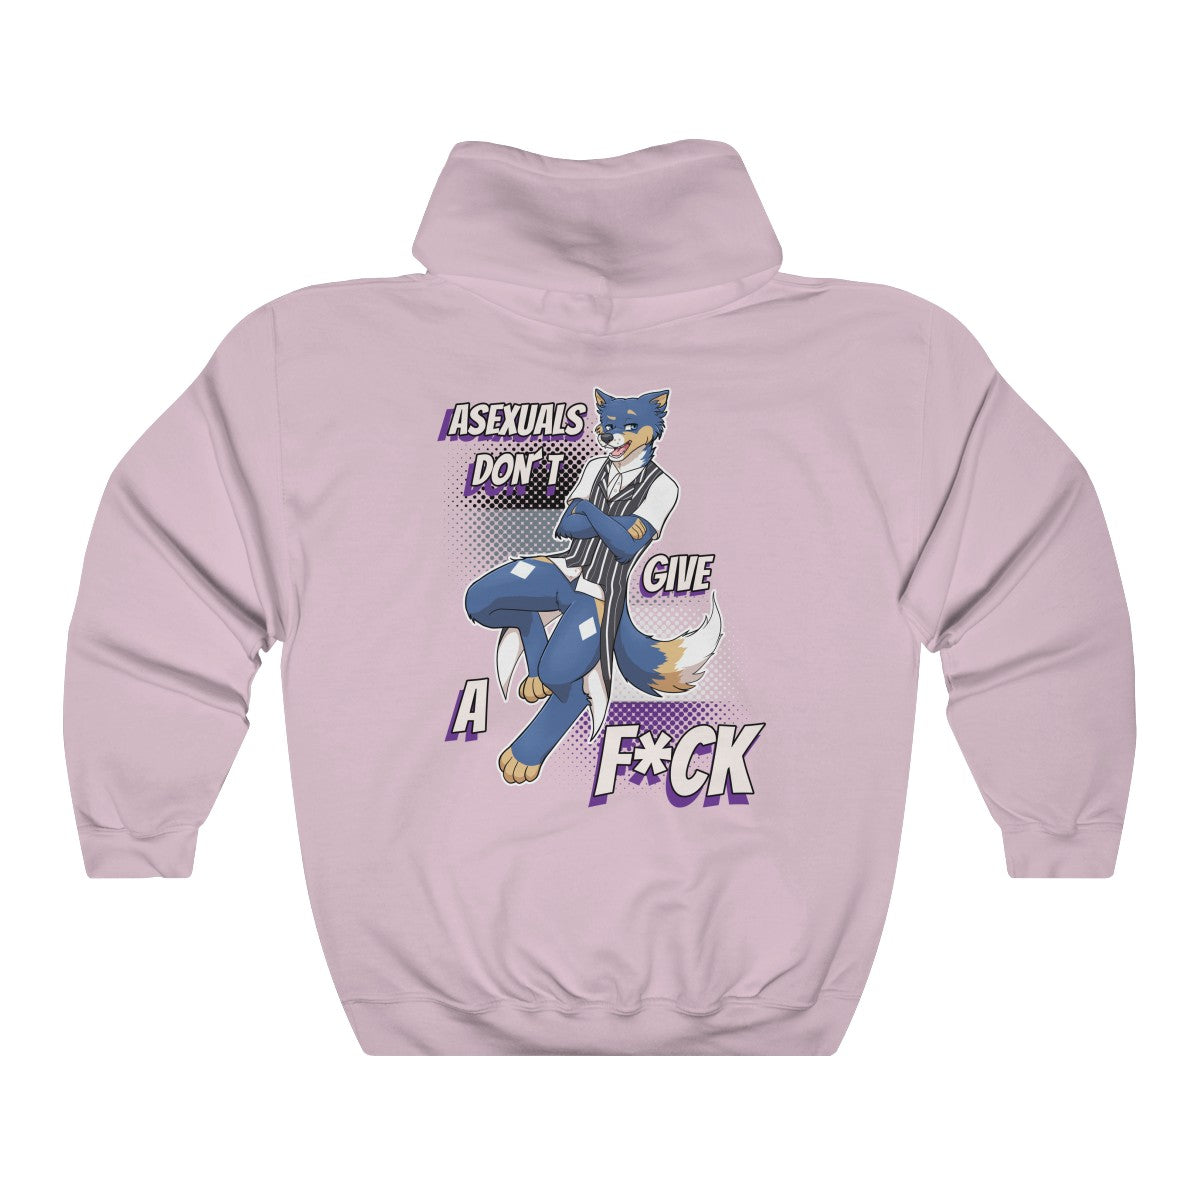 Asexual Don't Give A F*ck - Hoodie Hoodie Artemis Wishfoot Light Pink S 